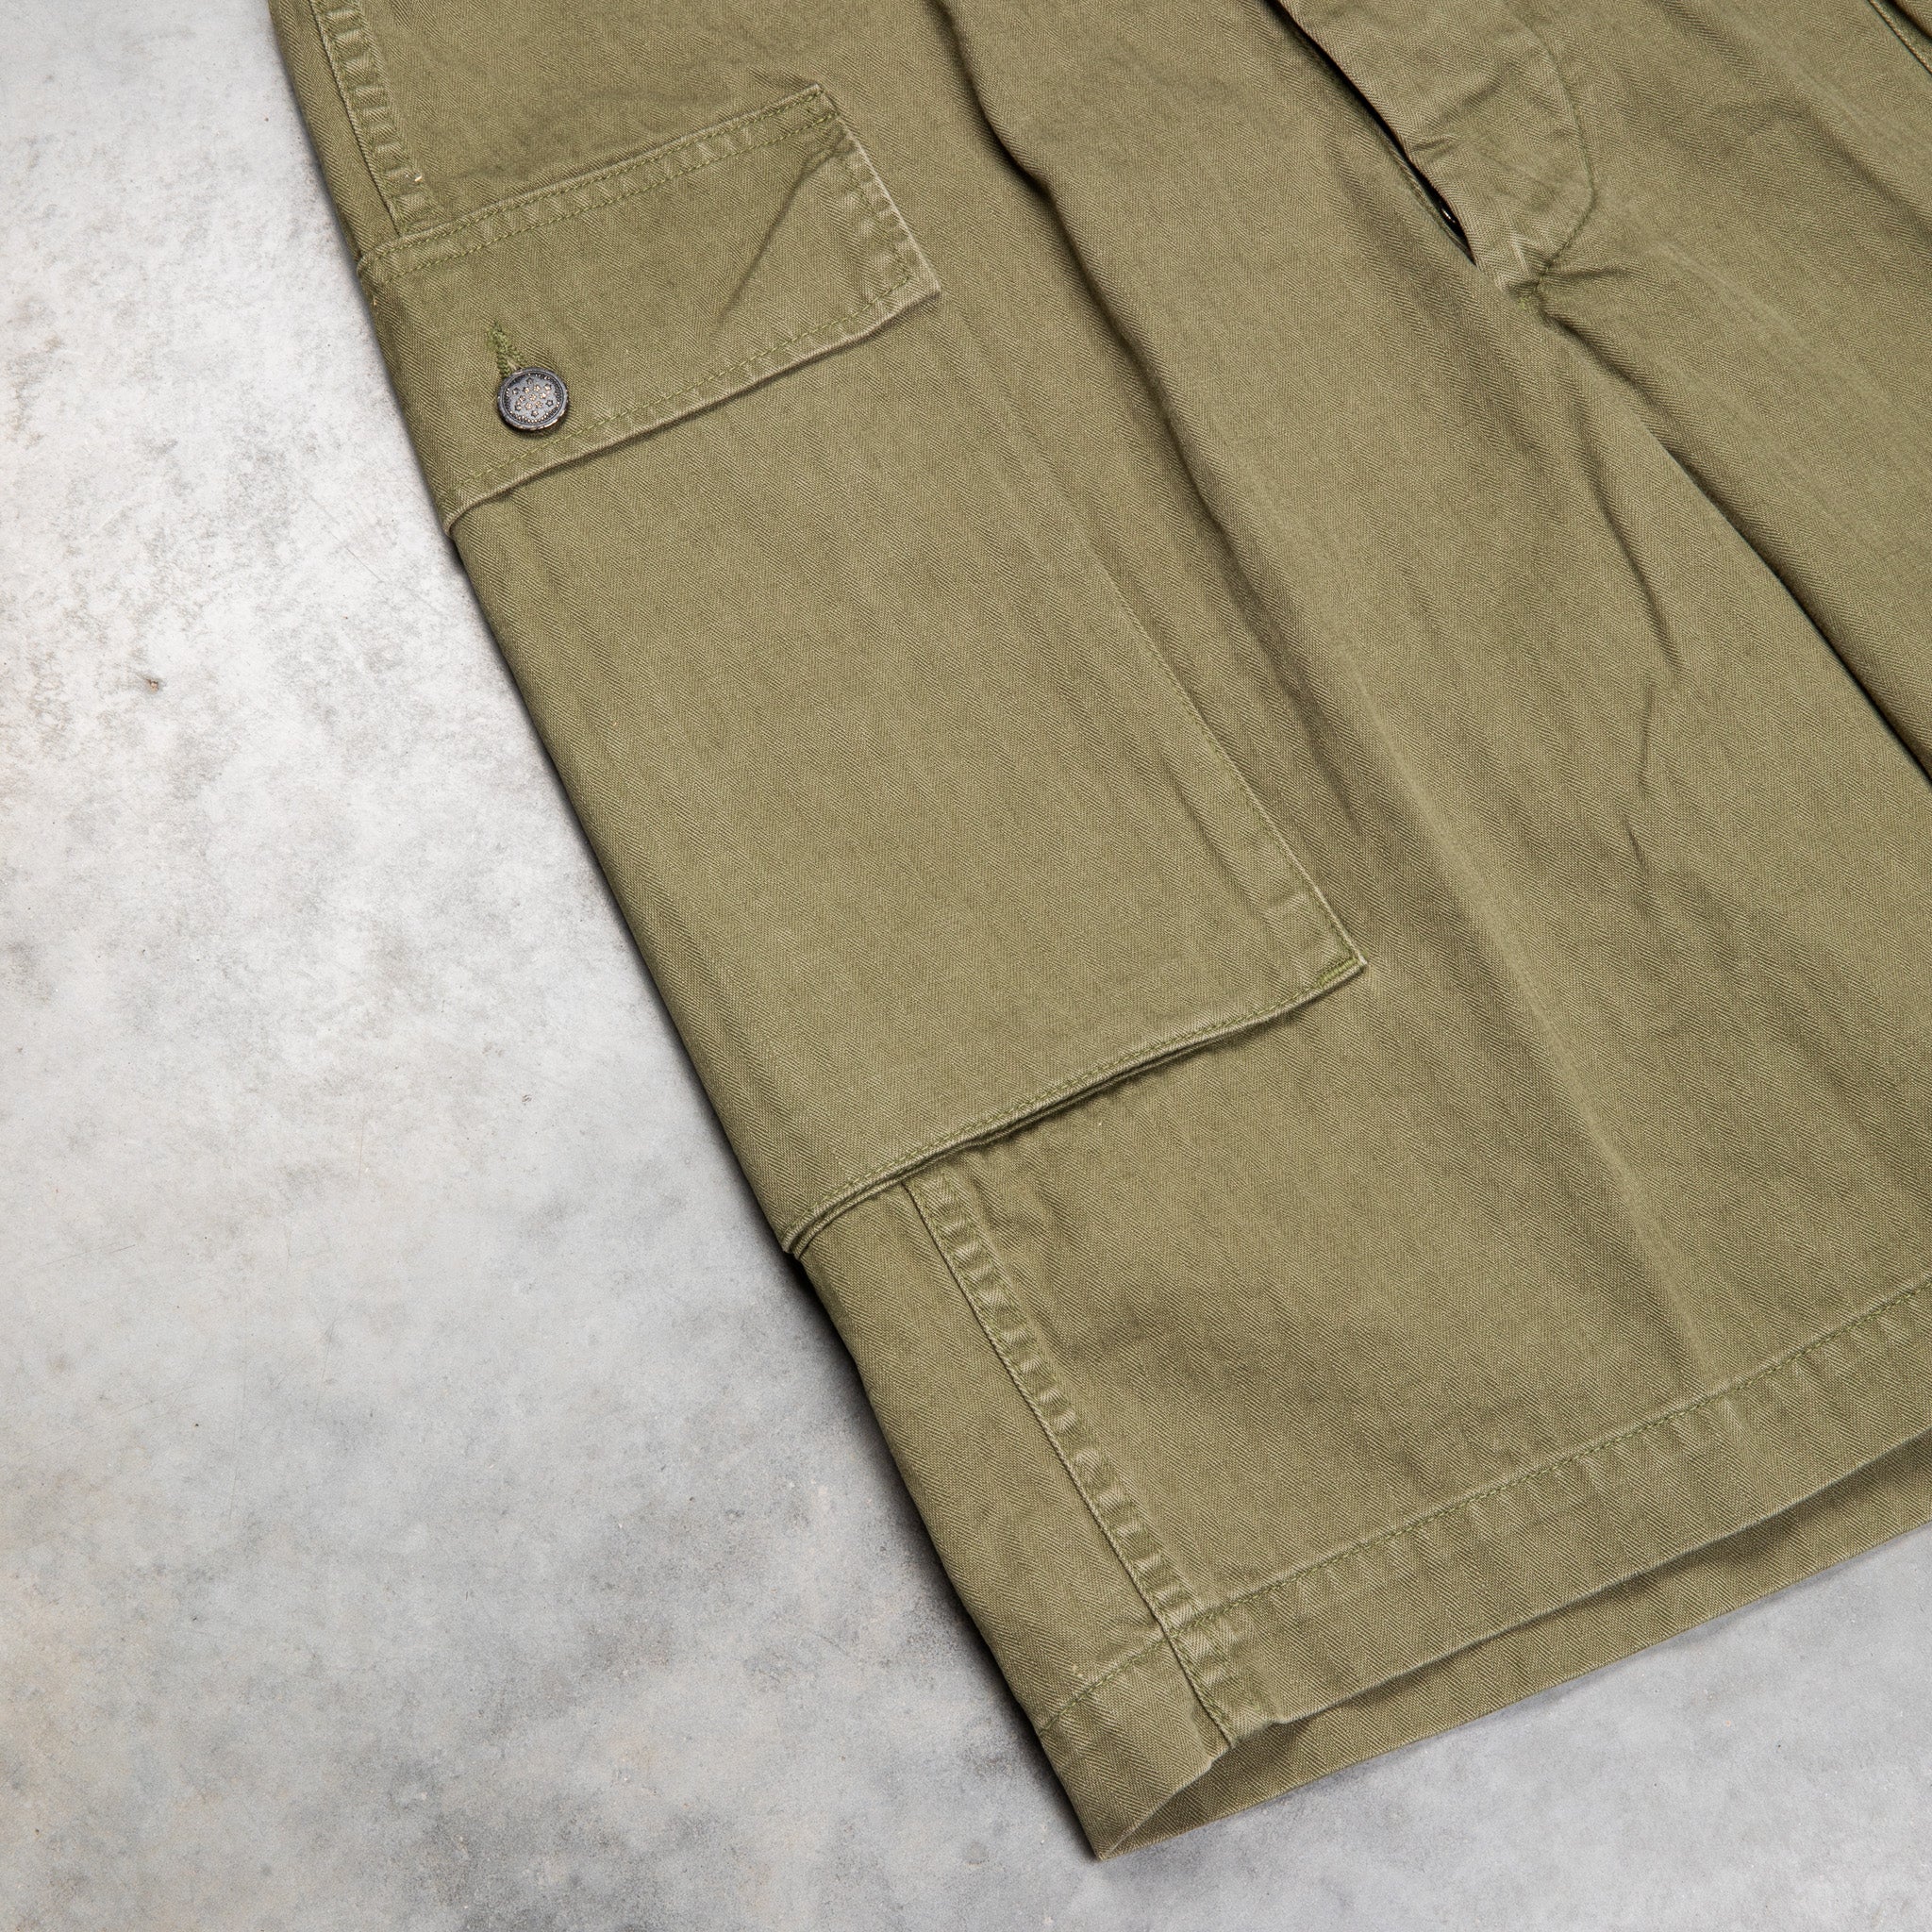 Orslow U.S Army 2 pocket cargo shorts Army Green – Frans Boone Store